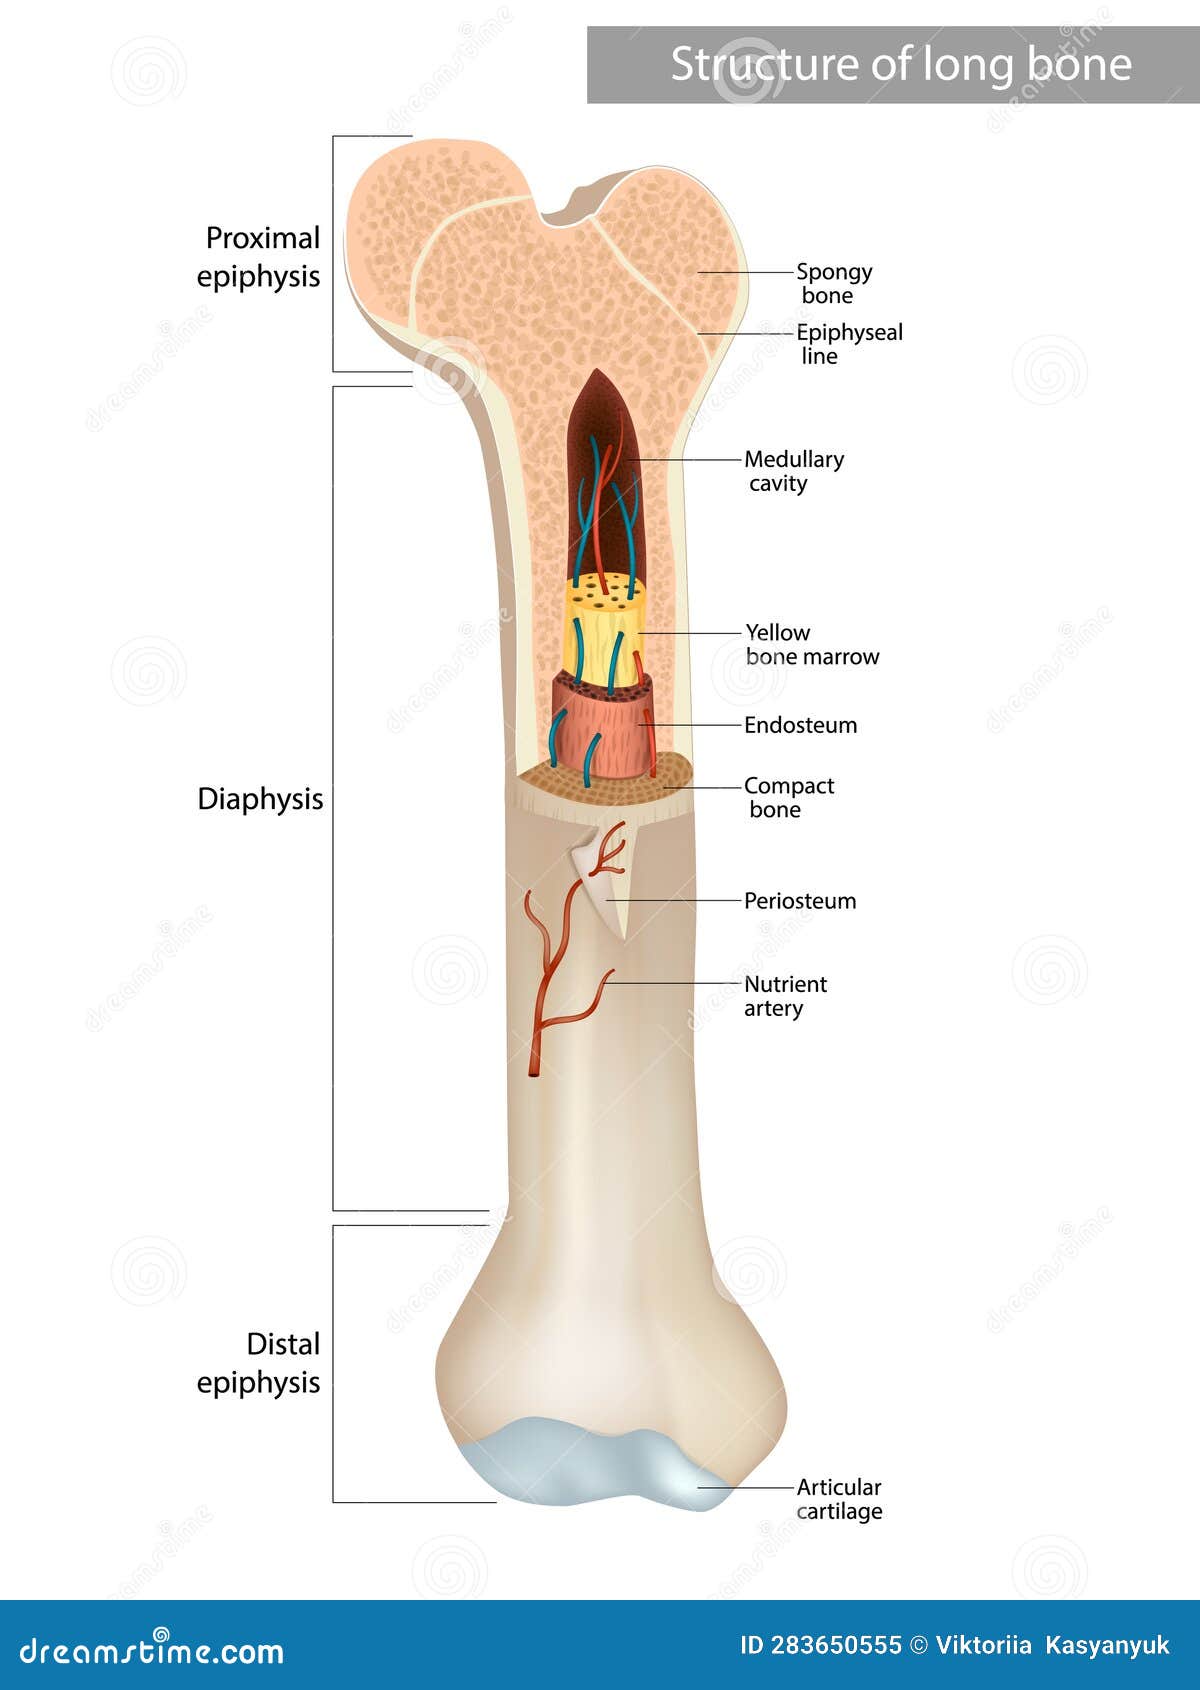 structure and components of long bone. proximal epiphysis,